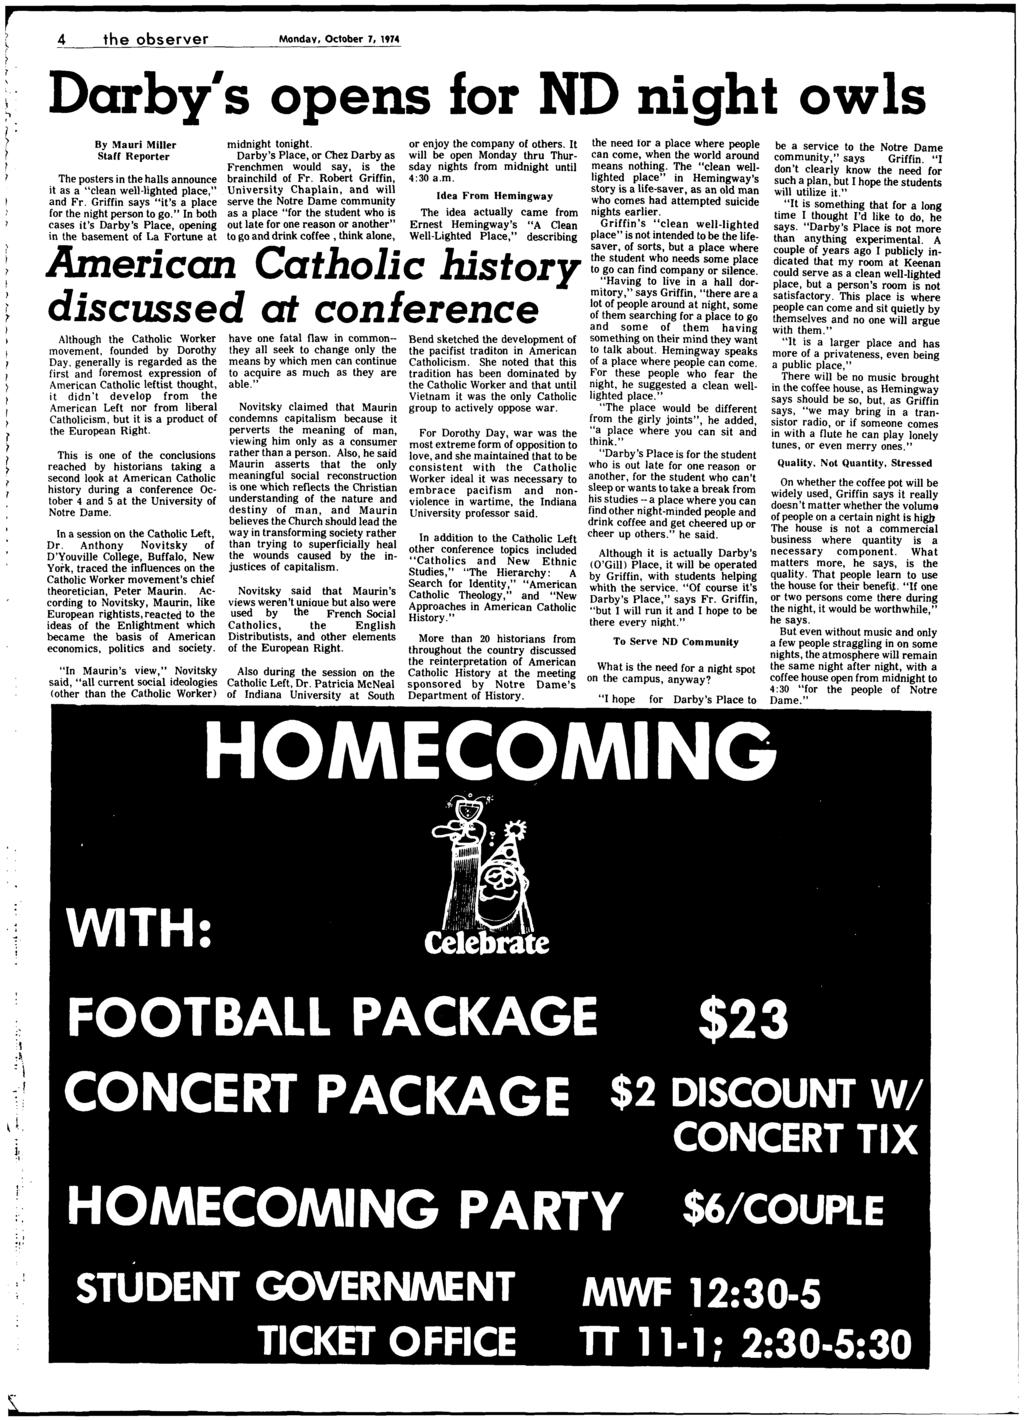 4 he observer Monday, Ocober 7, 1974 \ '-, ' ' r Darby's opens for ND nigh owls By Mauri Miller Saff Reporer The posers in he halls announce i as a "clean well-lighed place," and Fr.